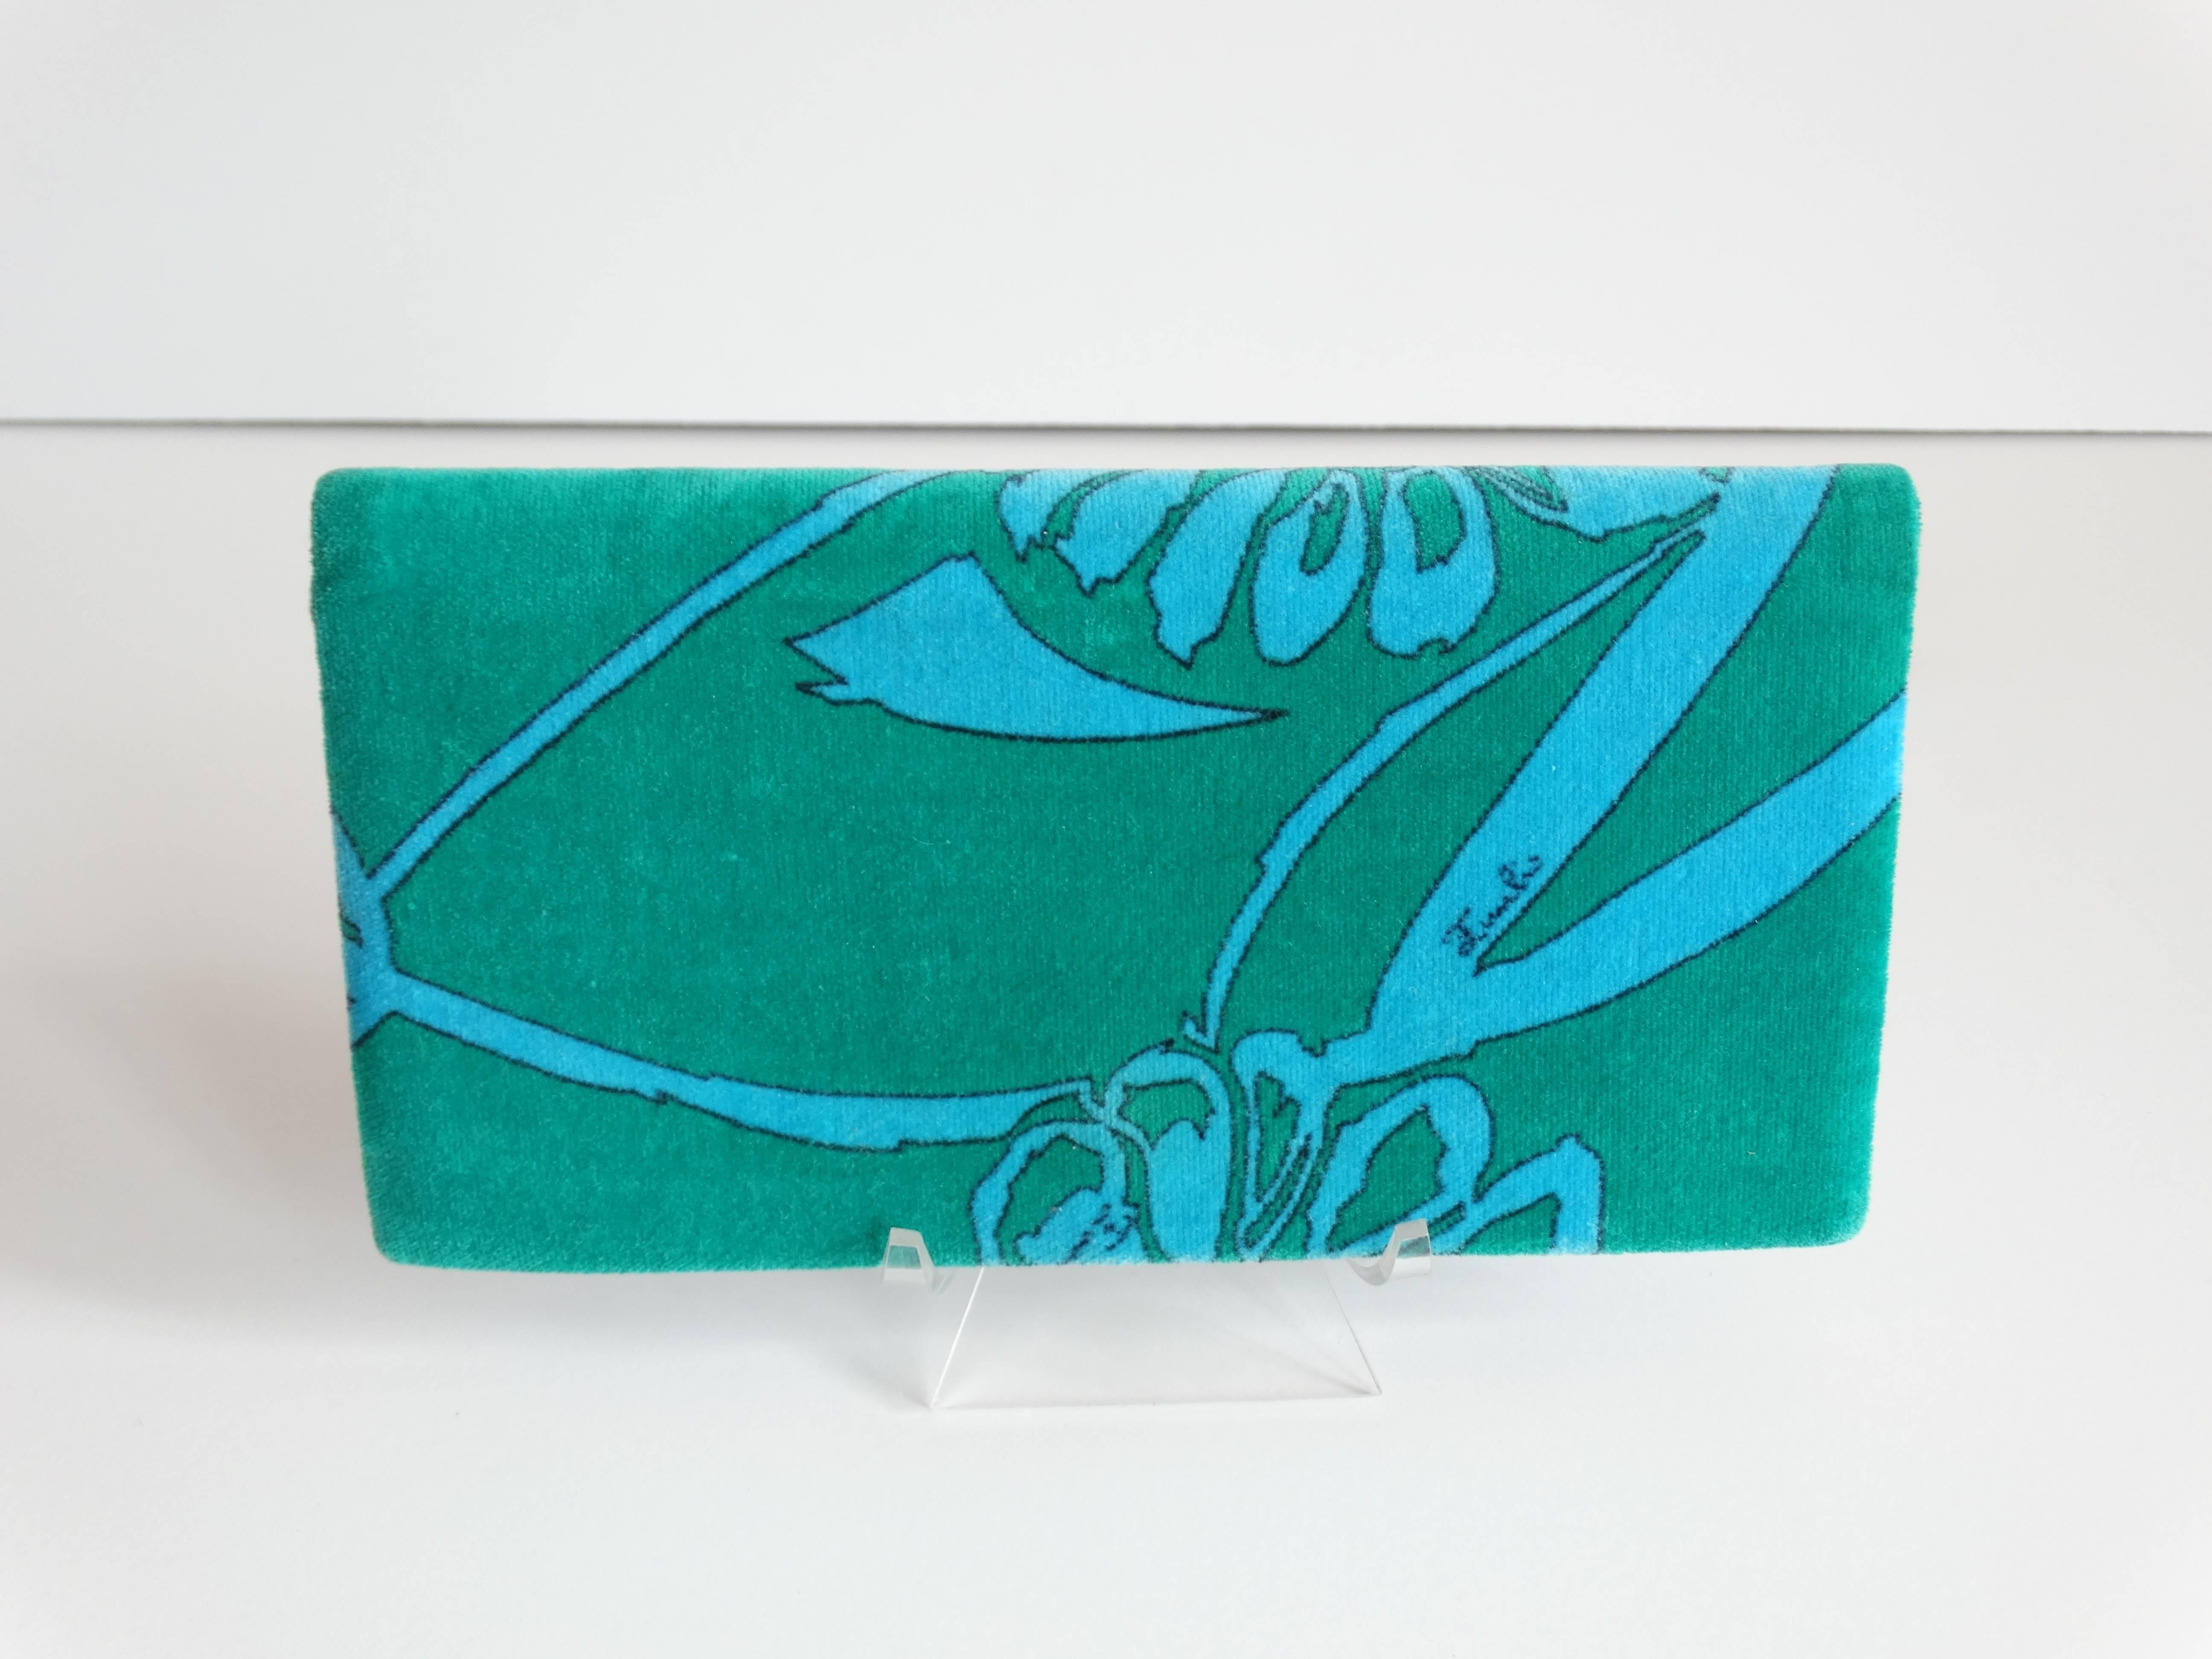 1960s Emilio Pucci Velour Wallet. Made in Italy. Fully lined teal leather interior. Snap closure. In nearly new condition with little signs of wear. Emilio Pucci classic signuture inside 

W 8” x H 4” 
